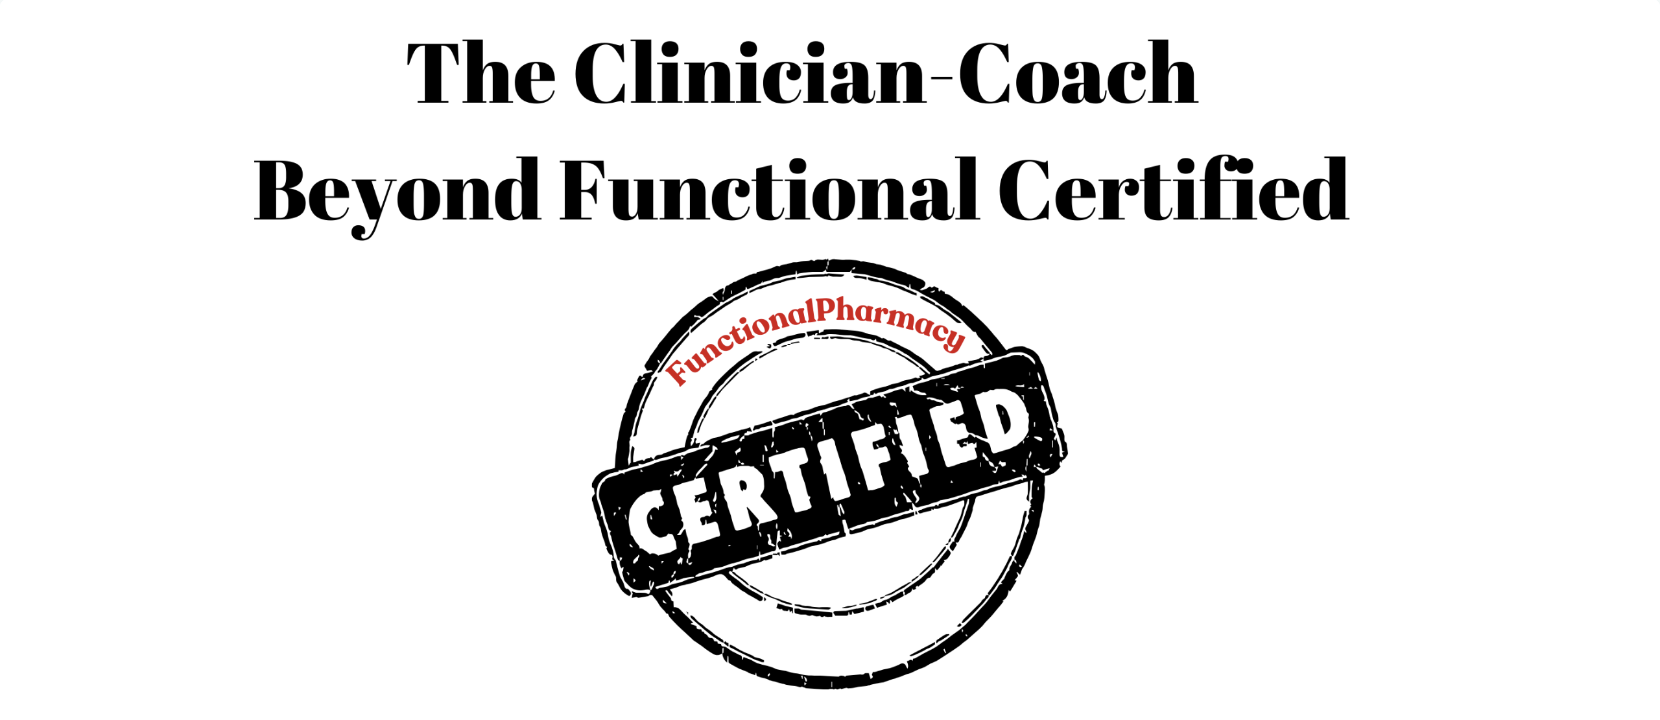 Functional Pharmacy & Beyond The Labs "Certification of Functional Clinician- Coach!" 